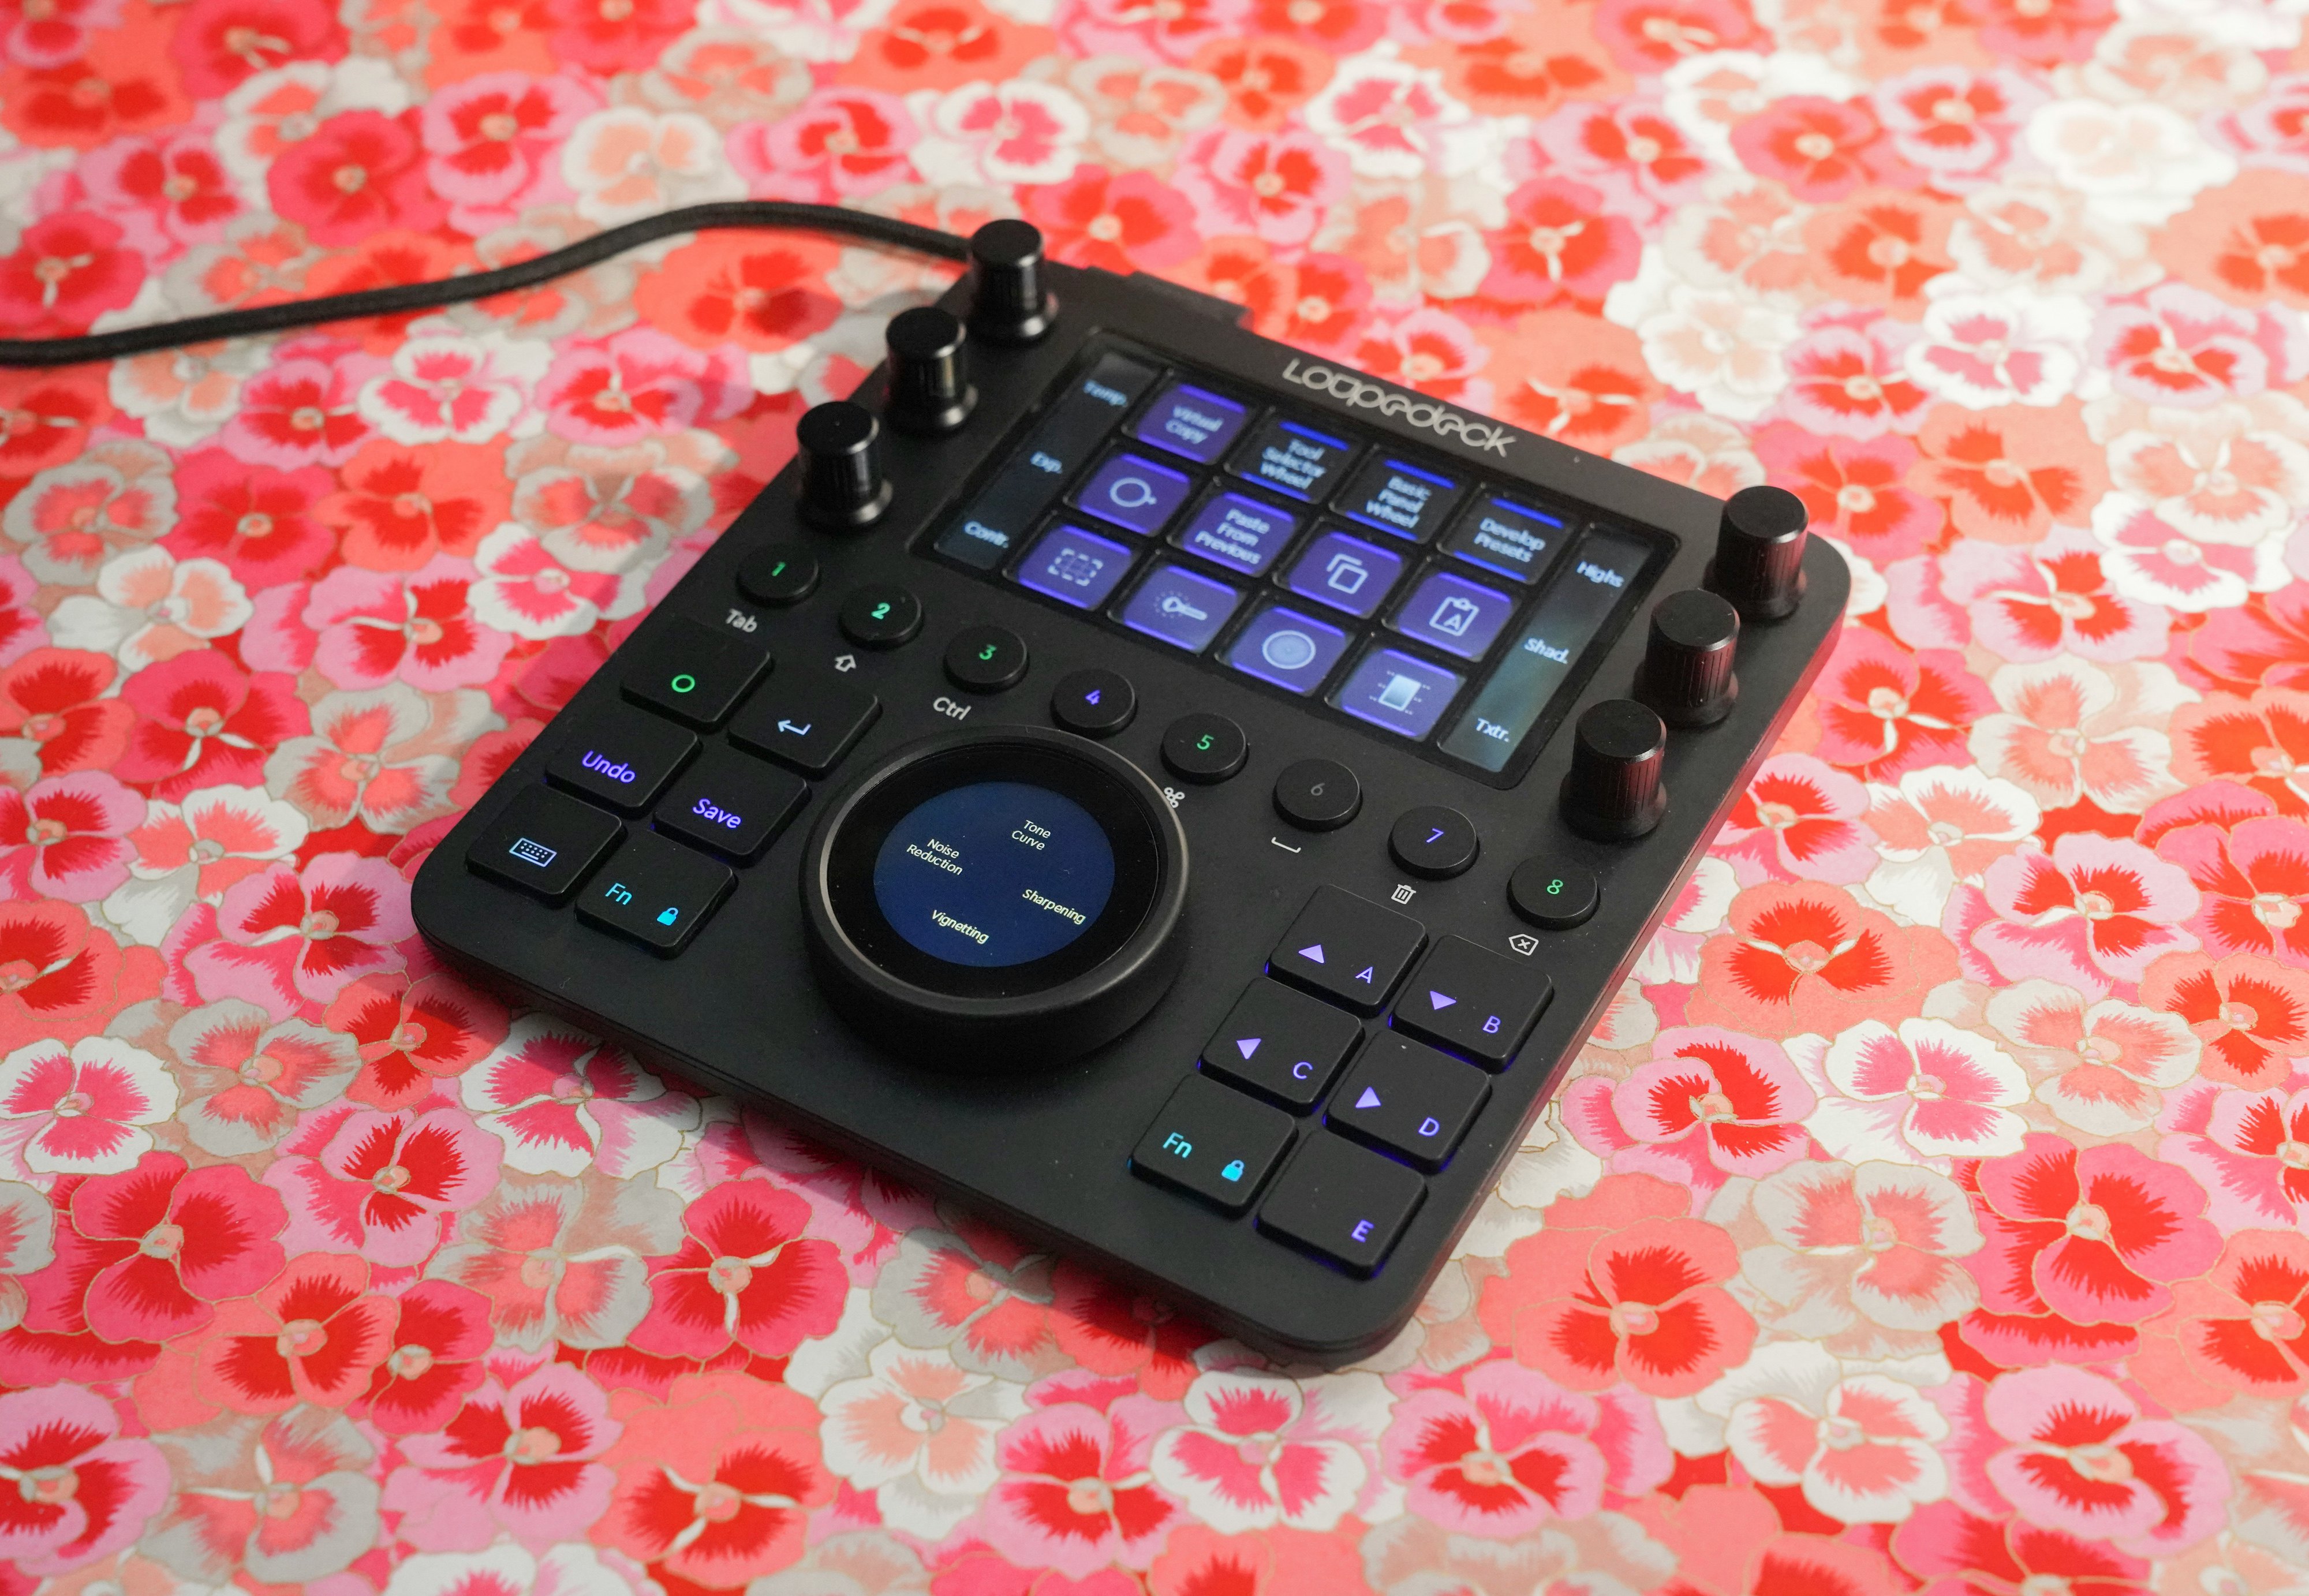 I used the Loupedeck CT to finally speed-edit my never-ending 